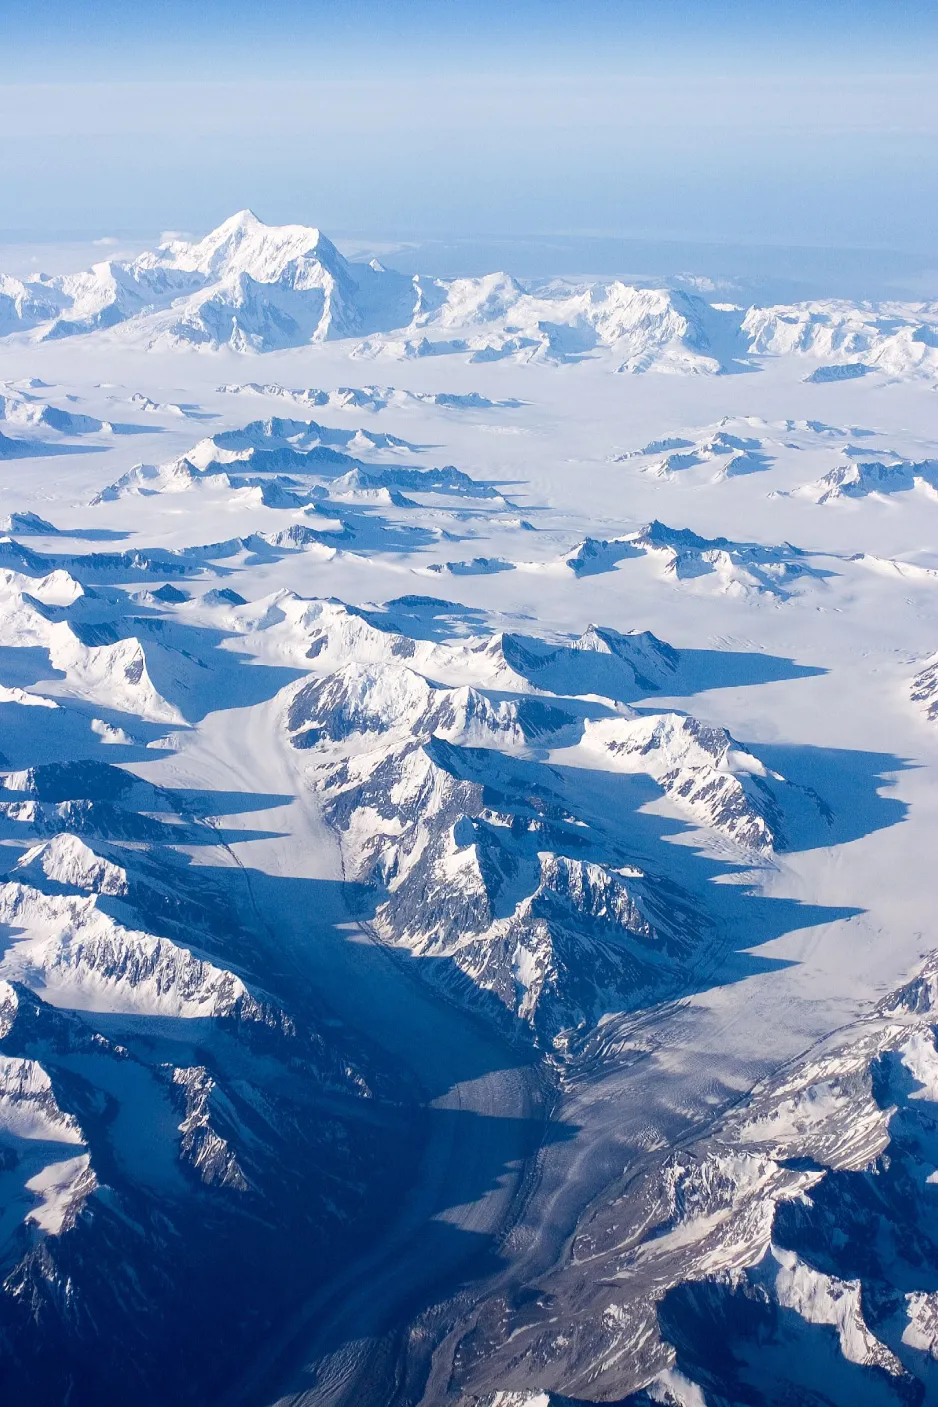 An image taken from a plane at 36,000 feet, showing the Saint Elias Mountains covered in snow.